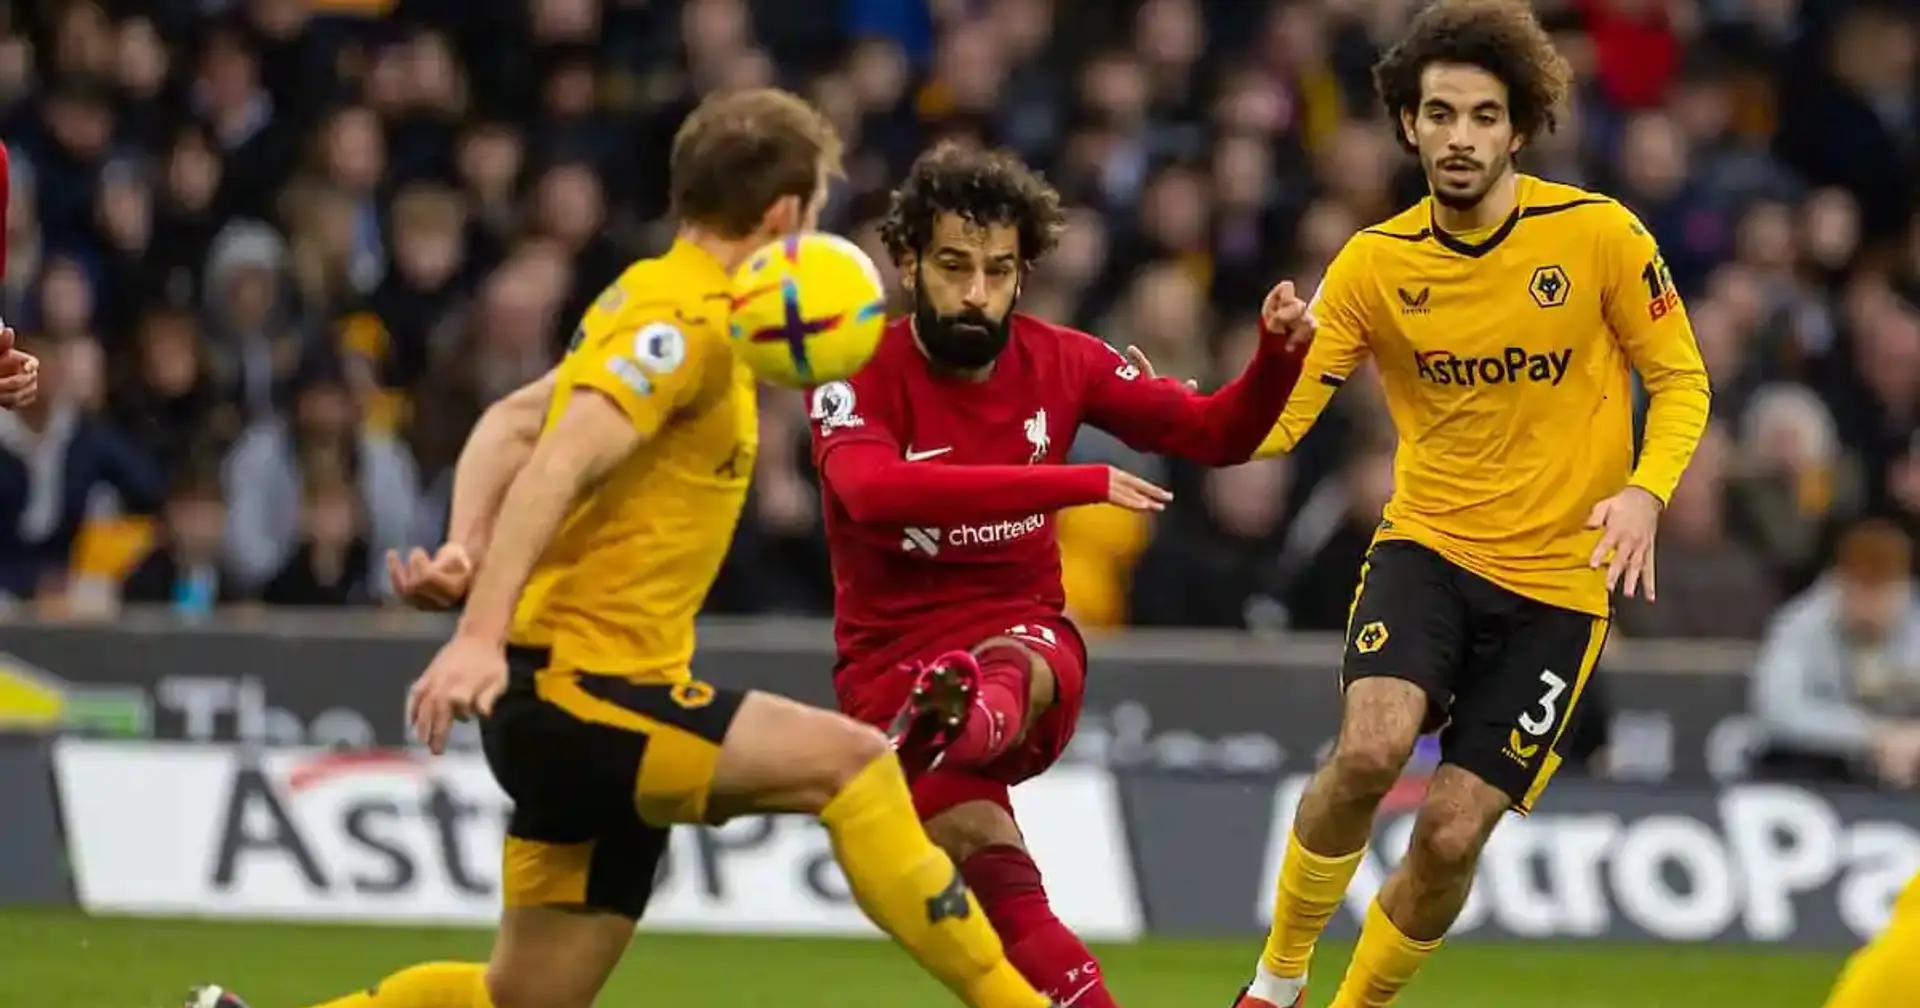 Wolves 1-3 Liverpool: LIVE updates, reactions, stats